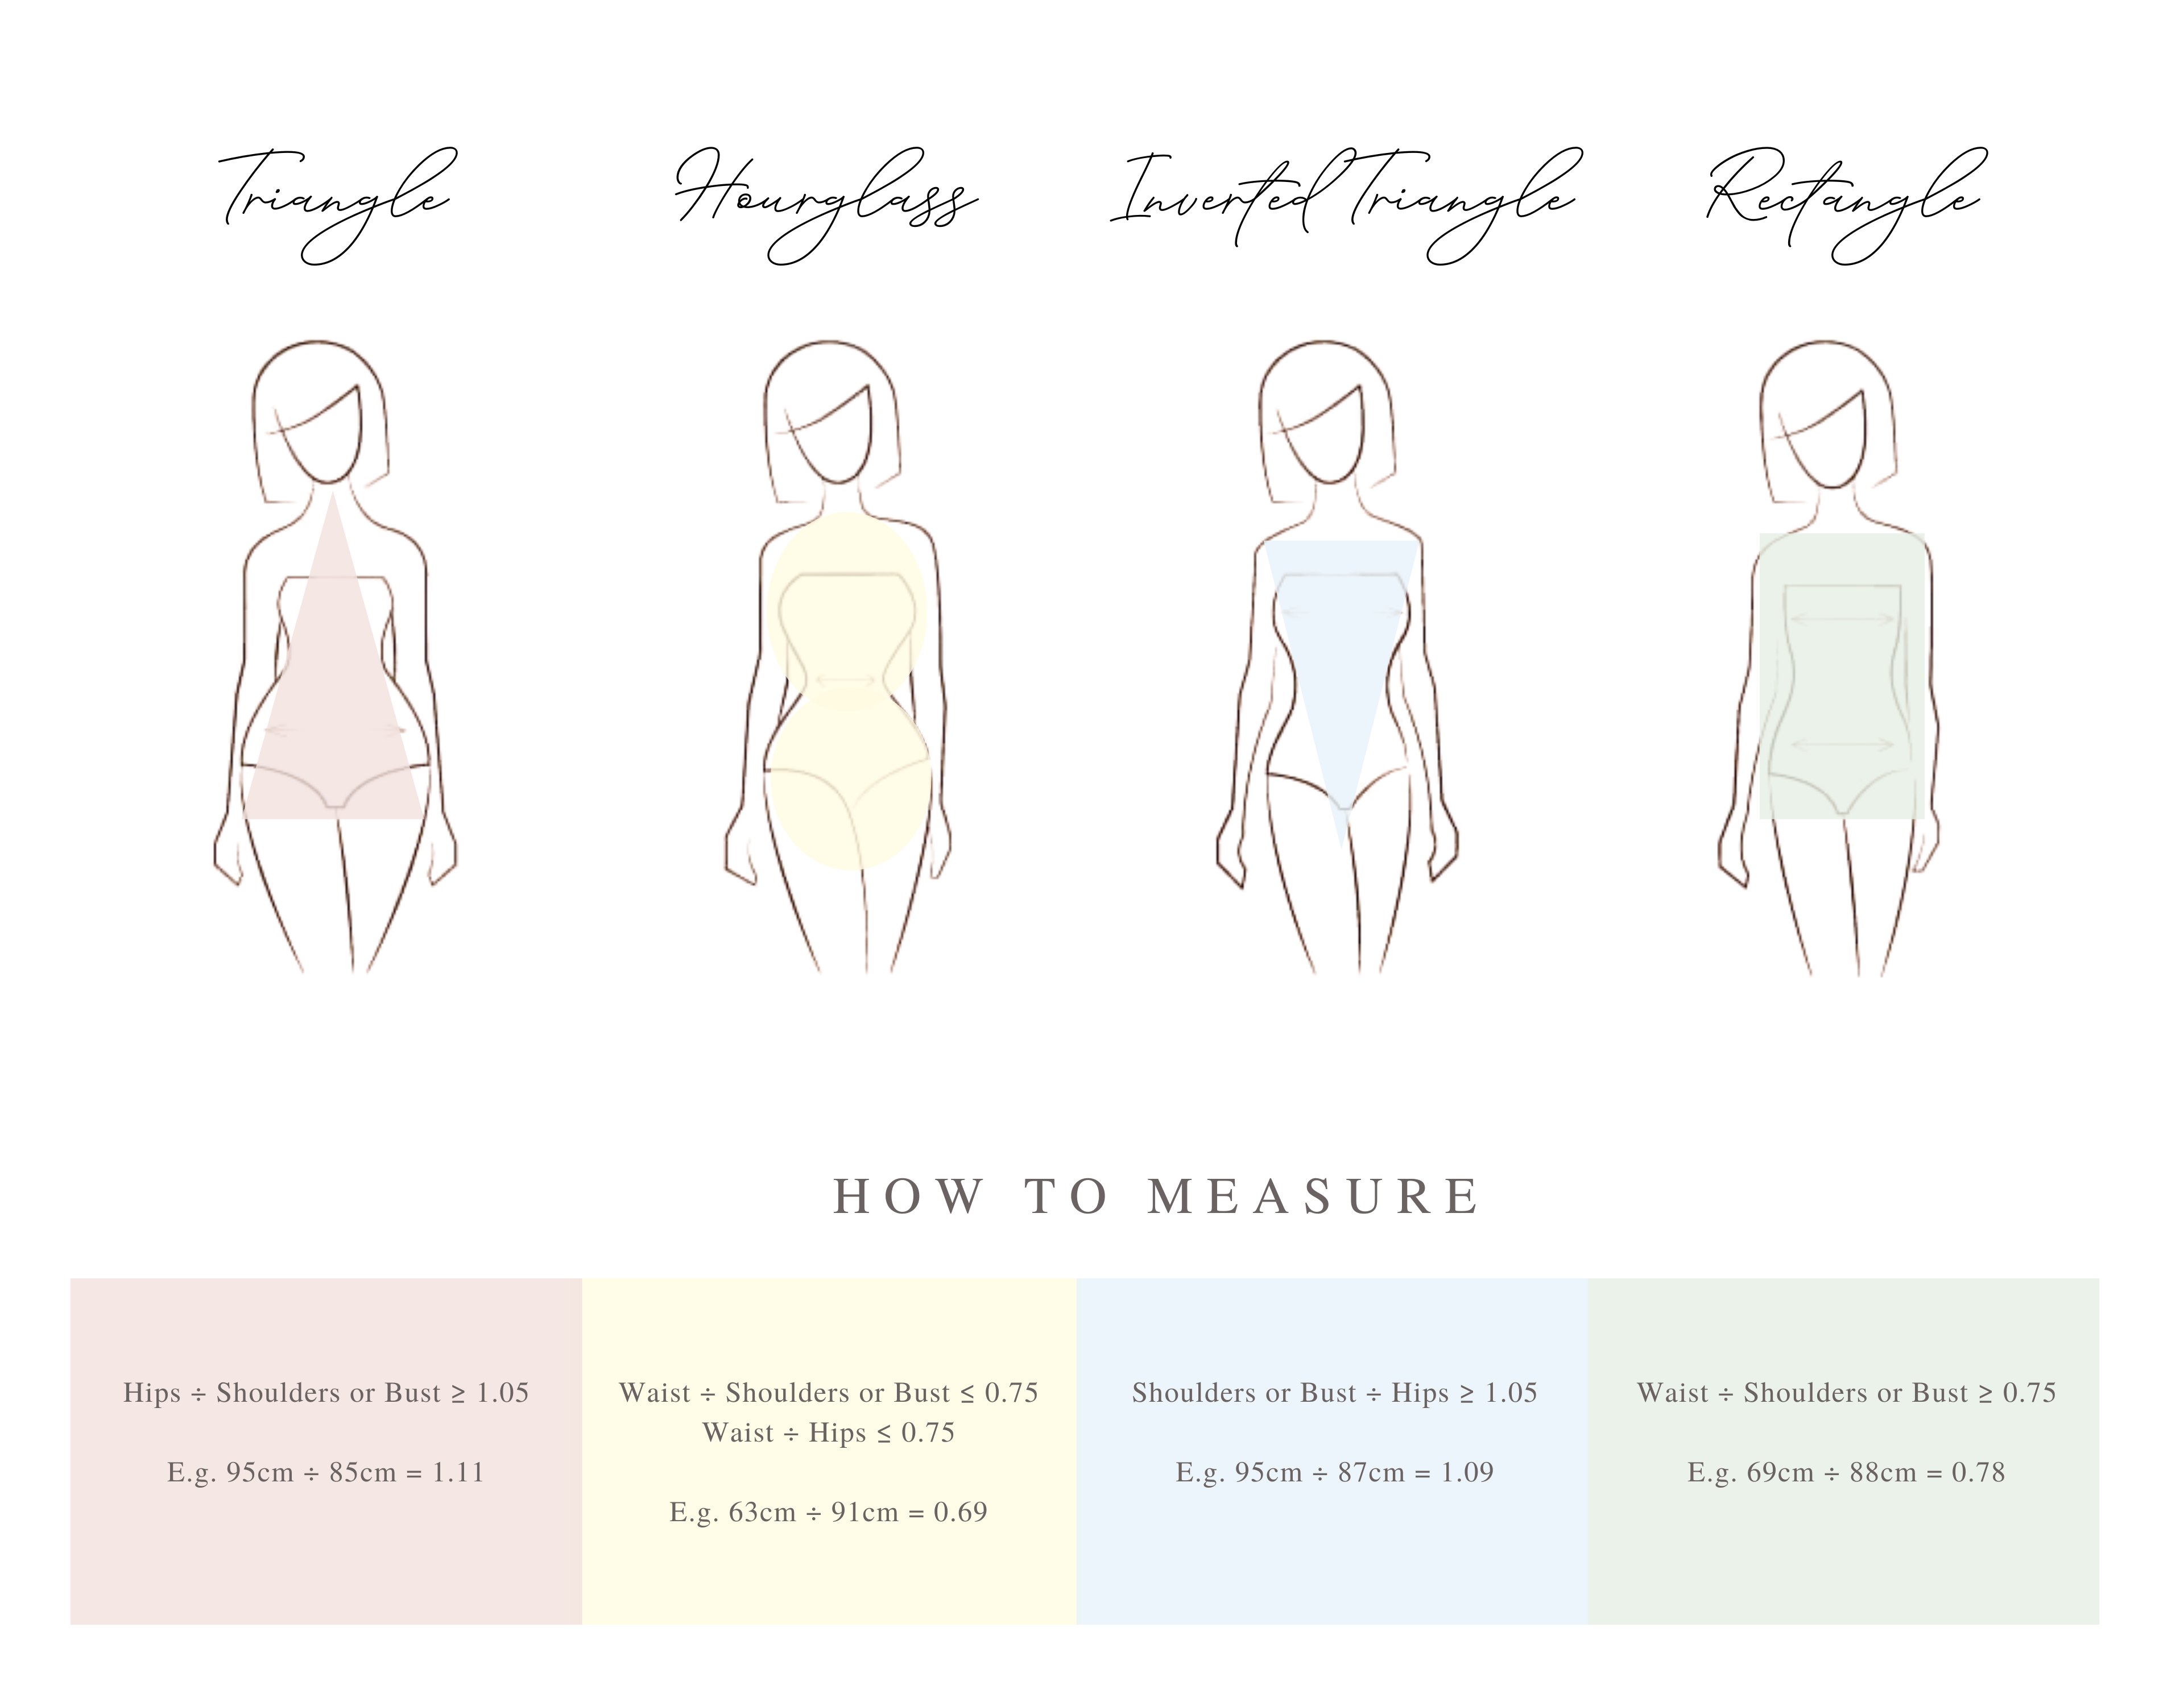 What Is Your Body Shape?